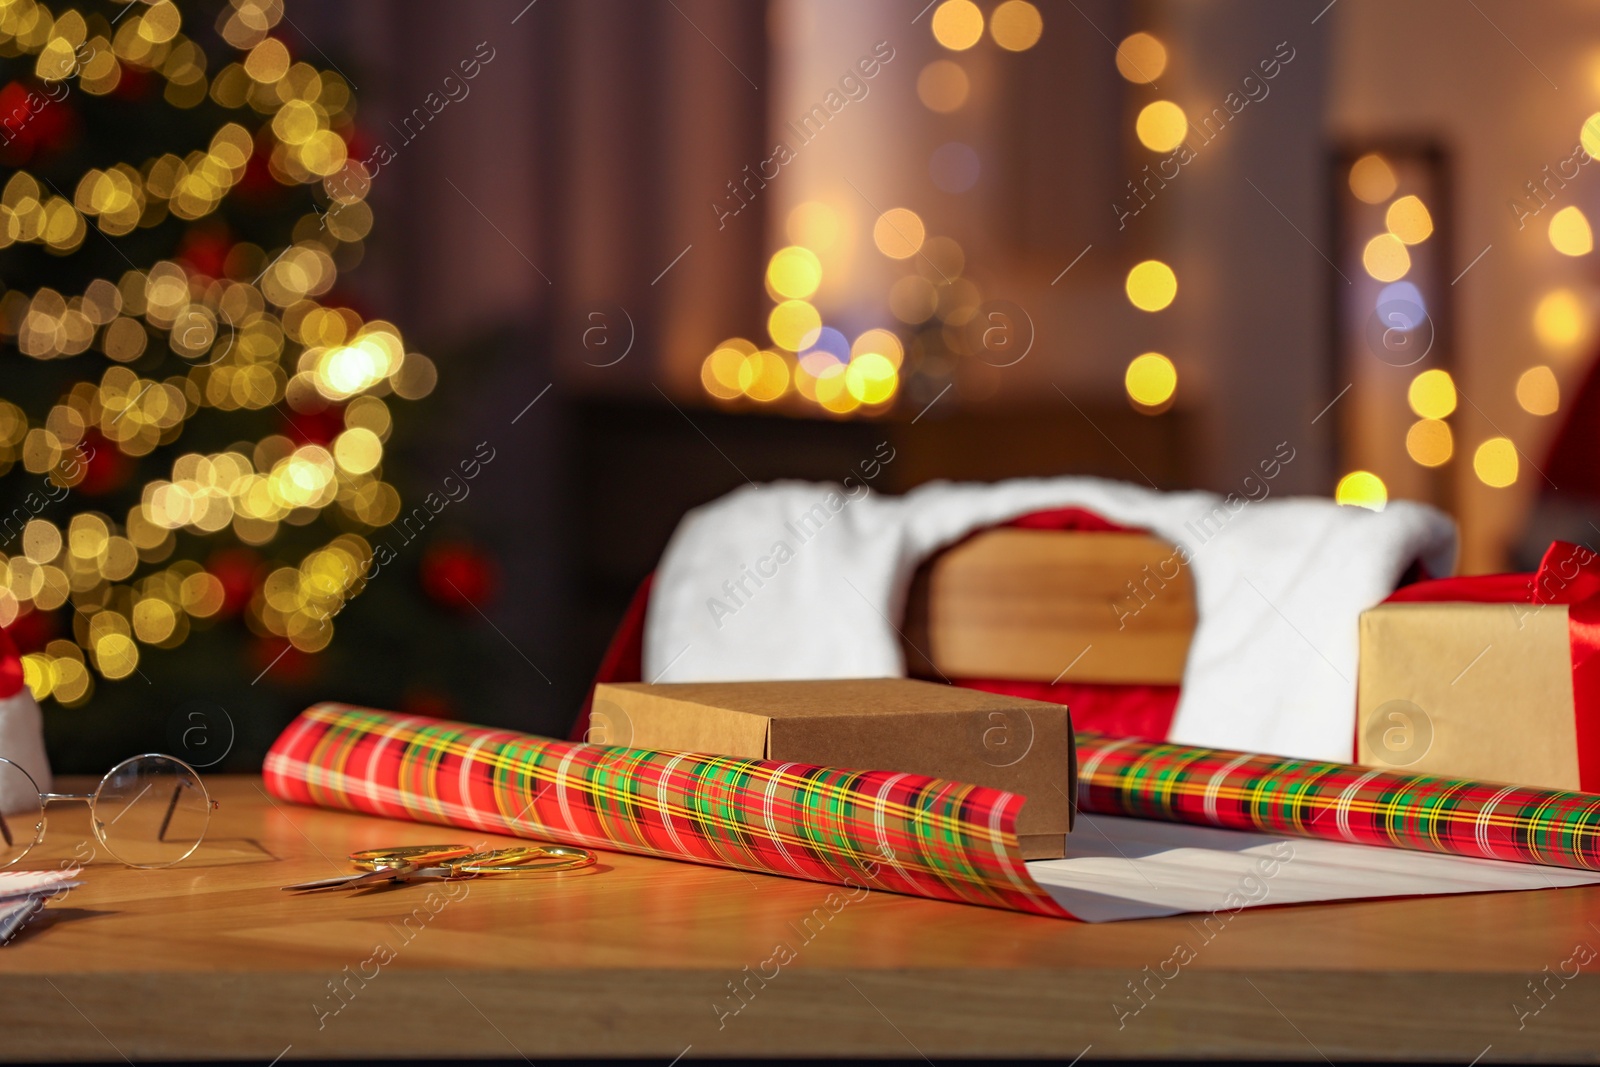 Photo of Santa's Claus workplace. Gift box and wrapping paper on table in room with Christmas tree